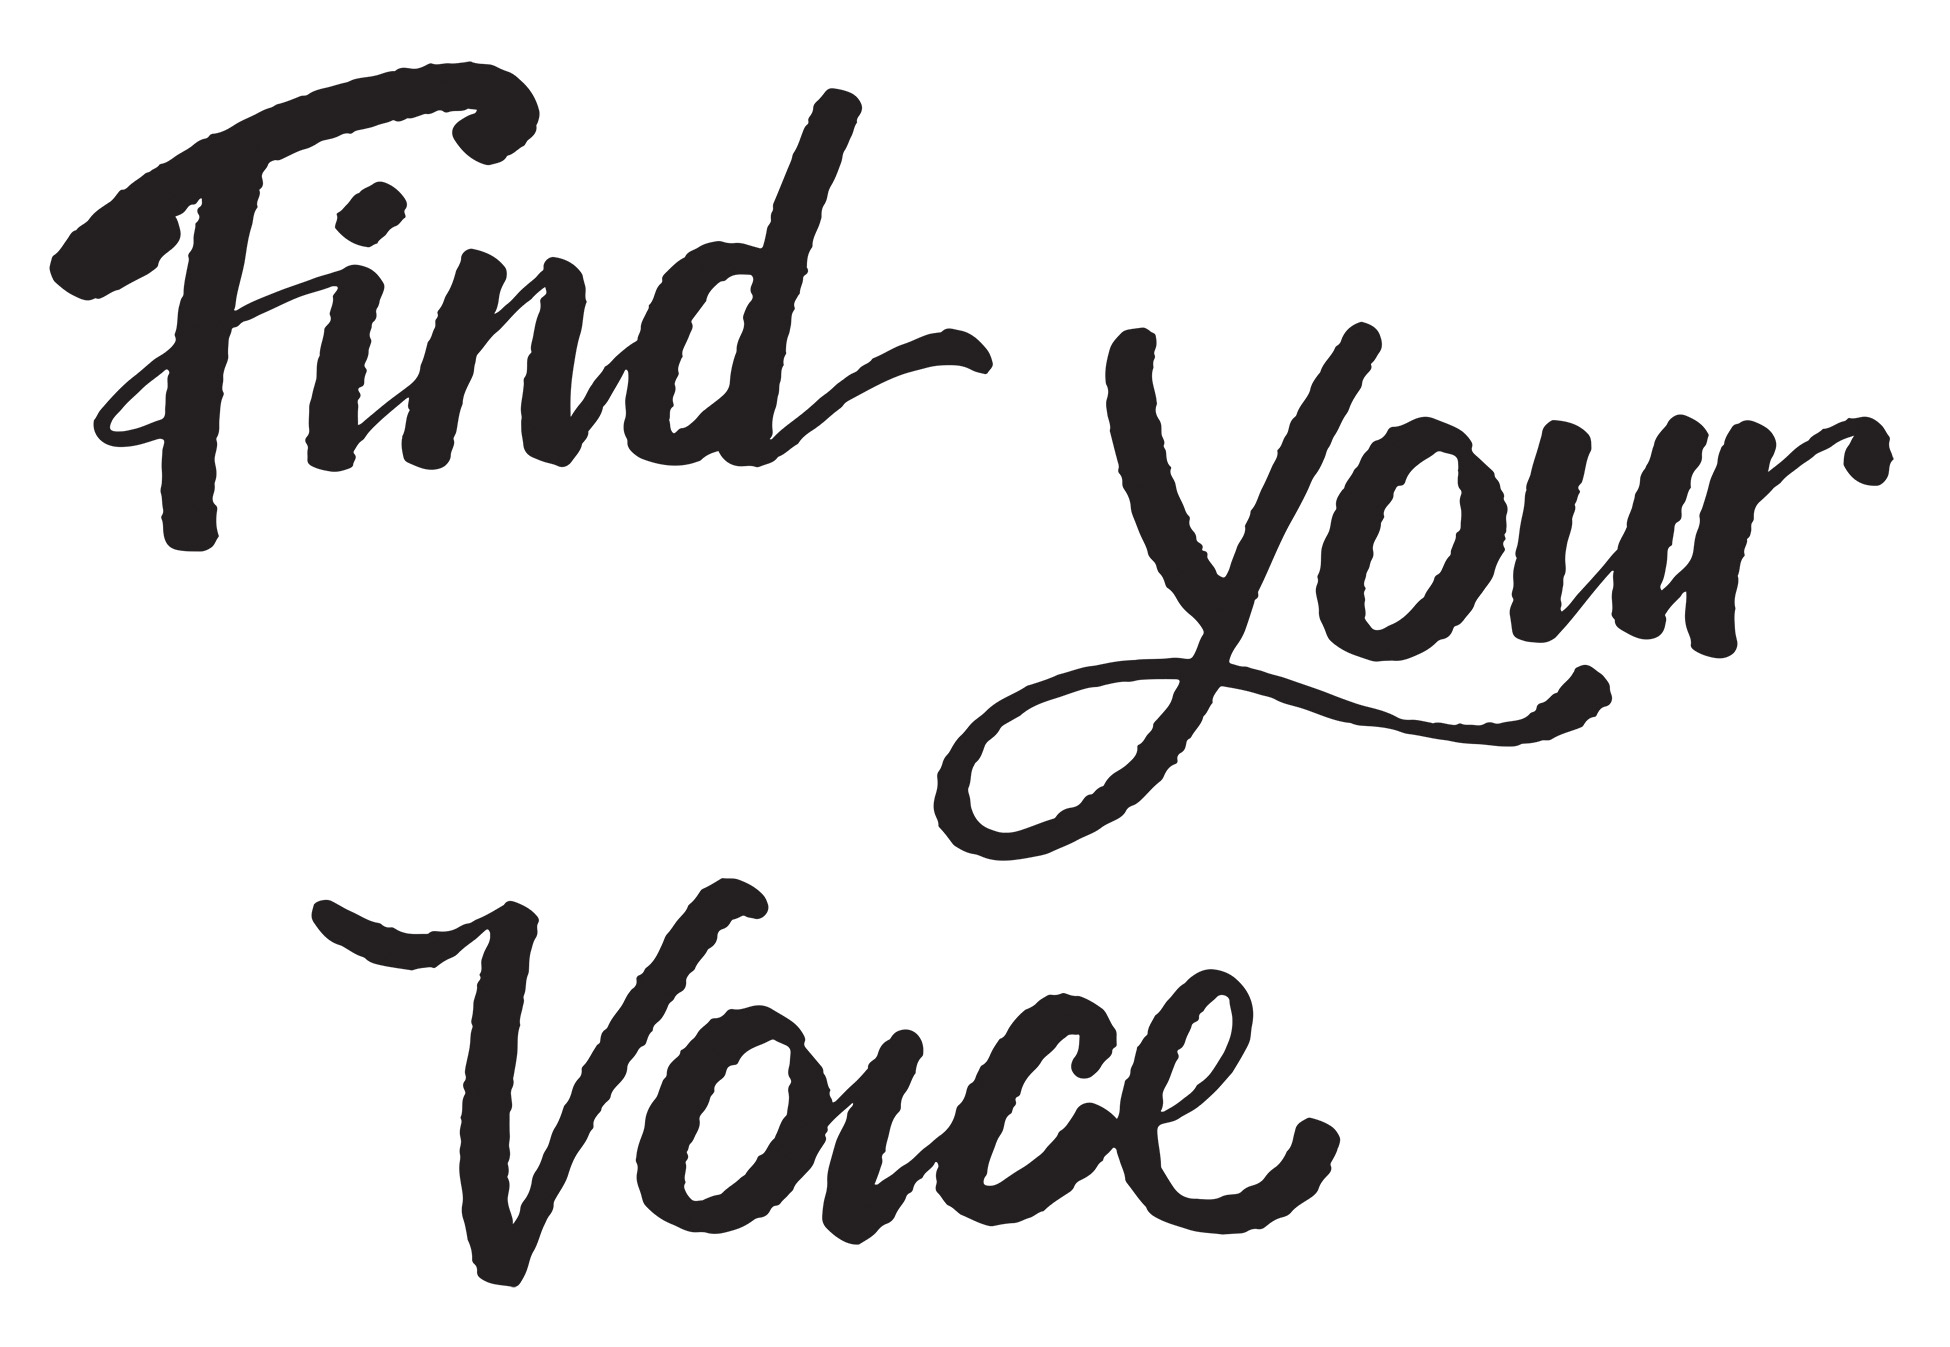 Find Your Voice Poetry Workshops